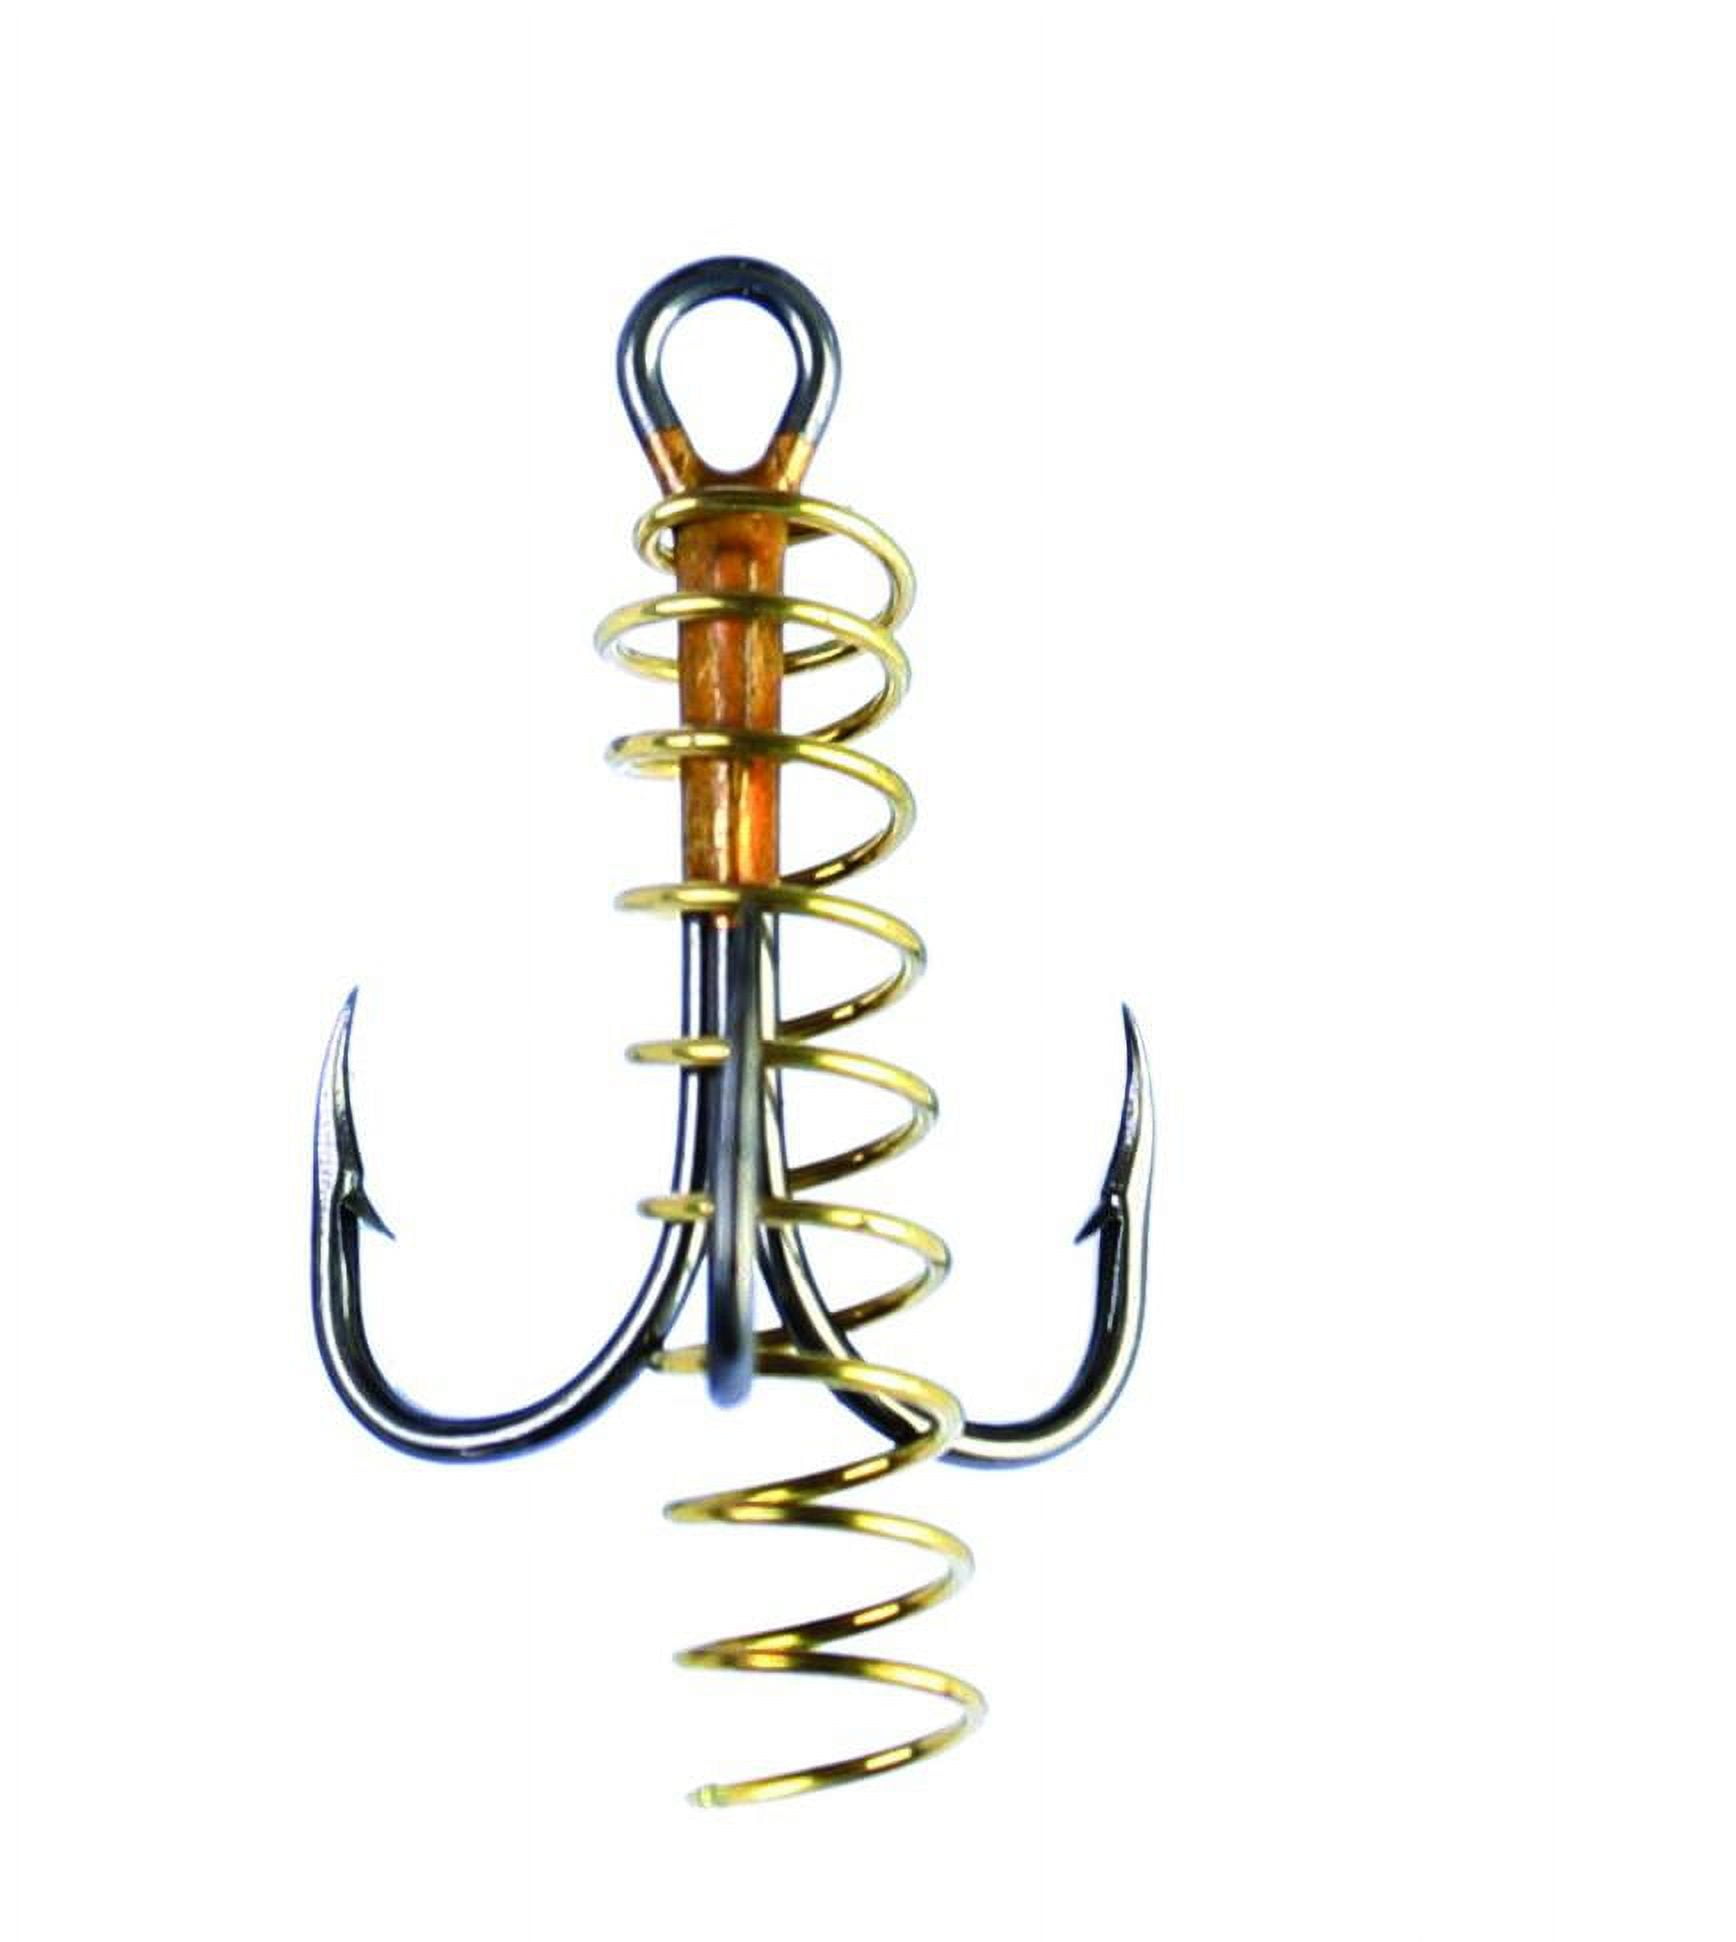 steel spring for fishing hooks - Pescamania